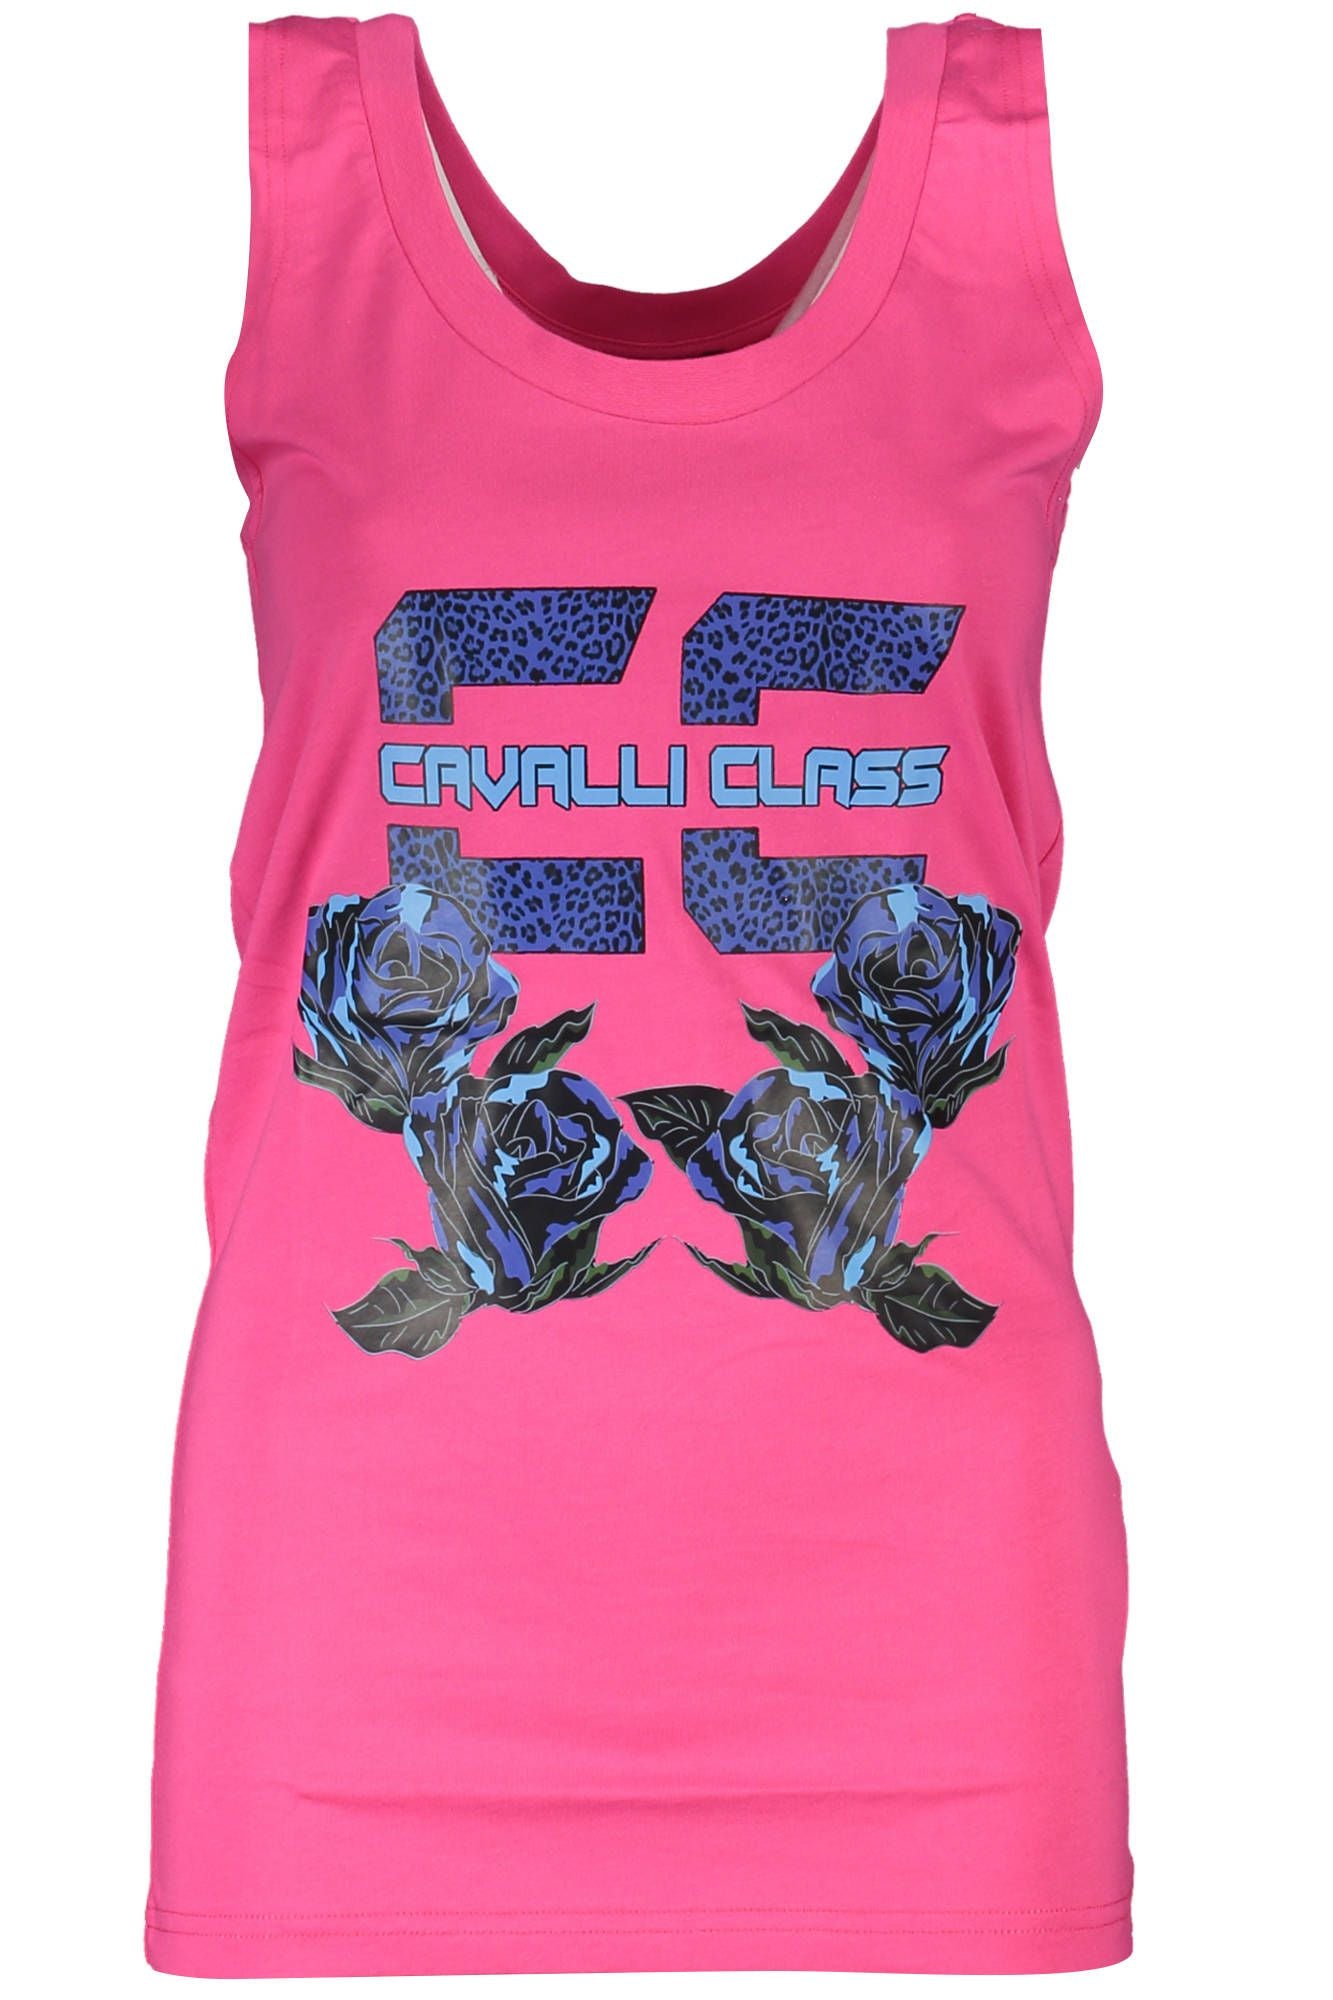 Cavalli Class Chic Pink Printed Tank Top with Logo